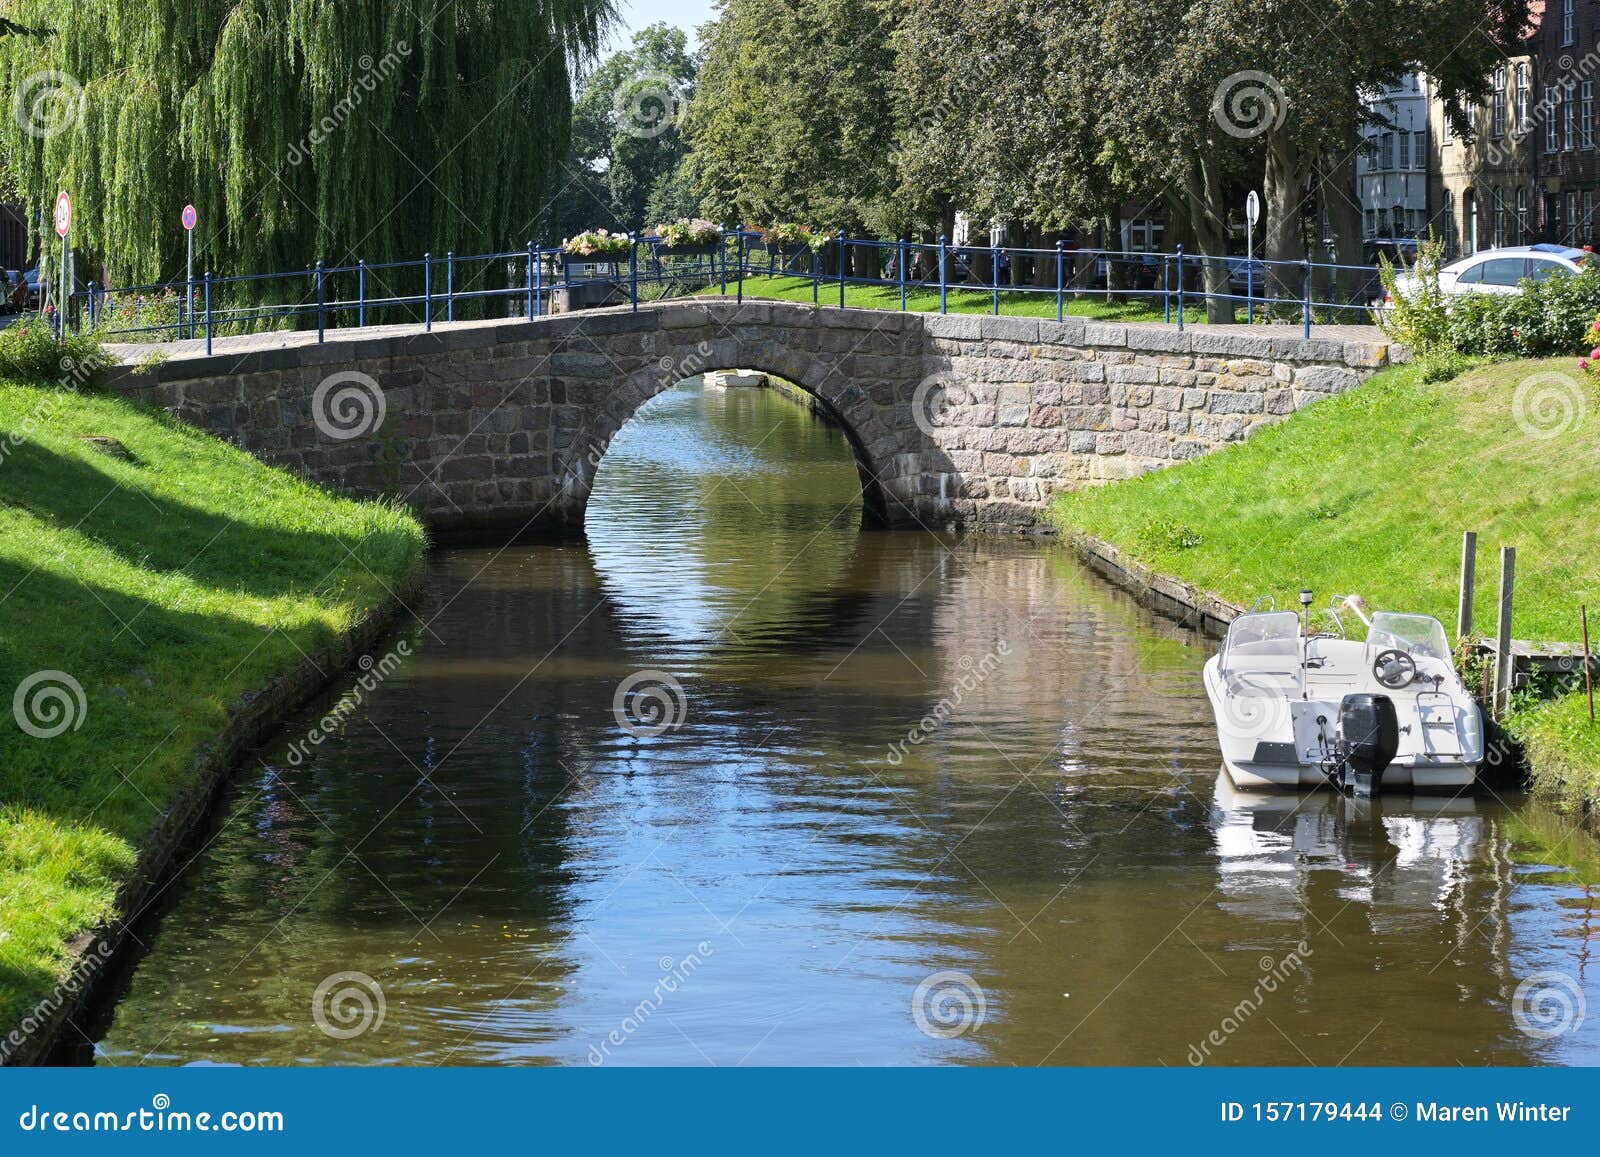 bridge over a gracht in friedrichstadt, the beautiful town in northern germany founded by dutch settlers